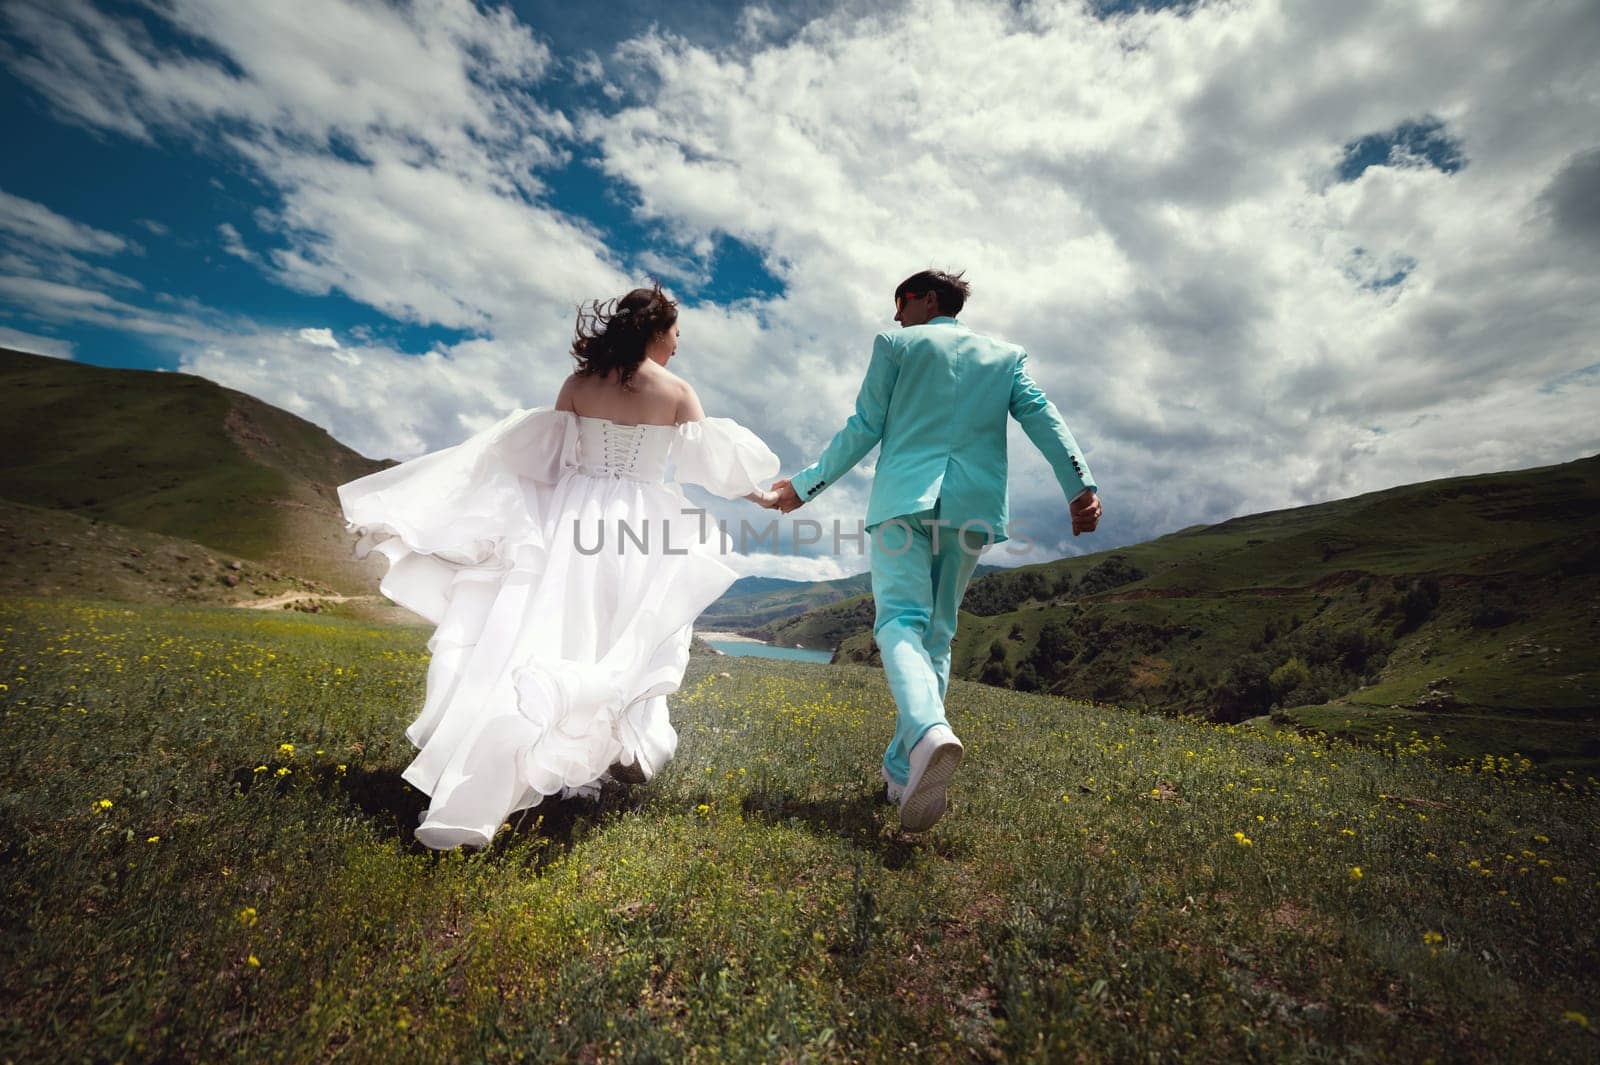 Rear view of running loving newlyweds holding hands, a bride in a wedding dress and a wife in a turquoise suit running across a field against the backdrop of green hills.